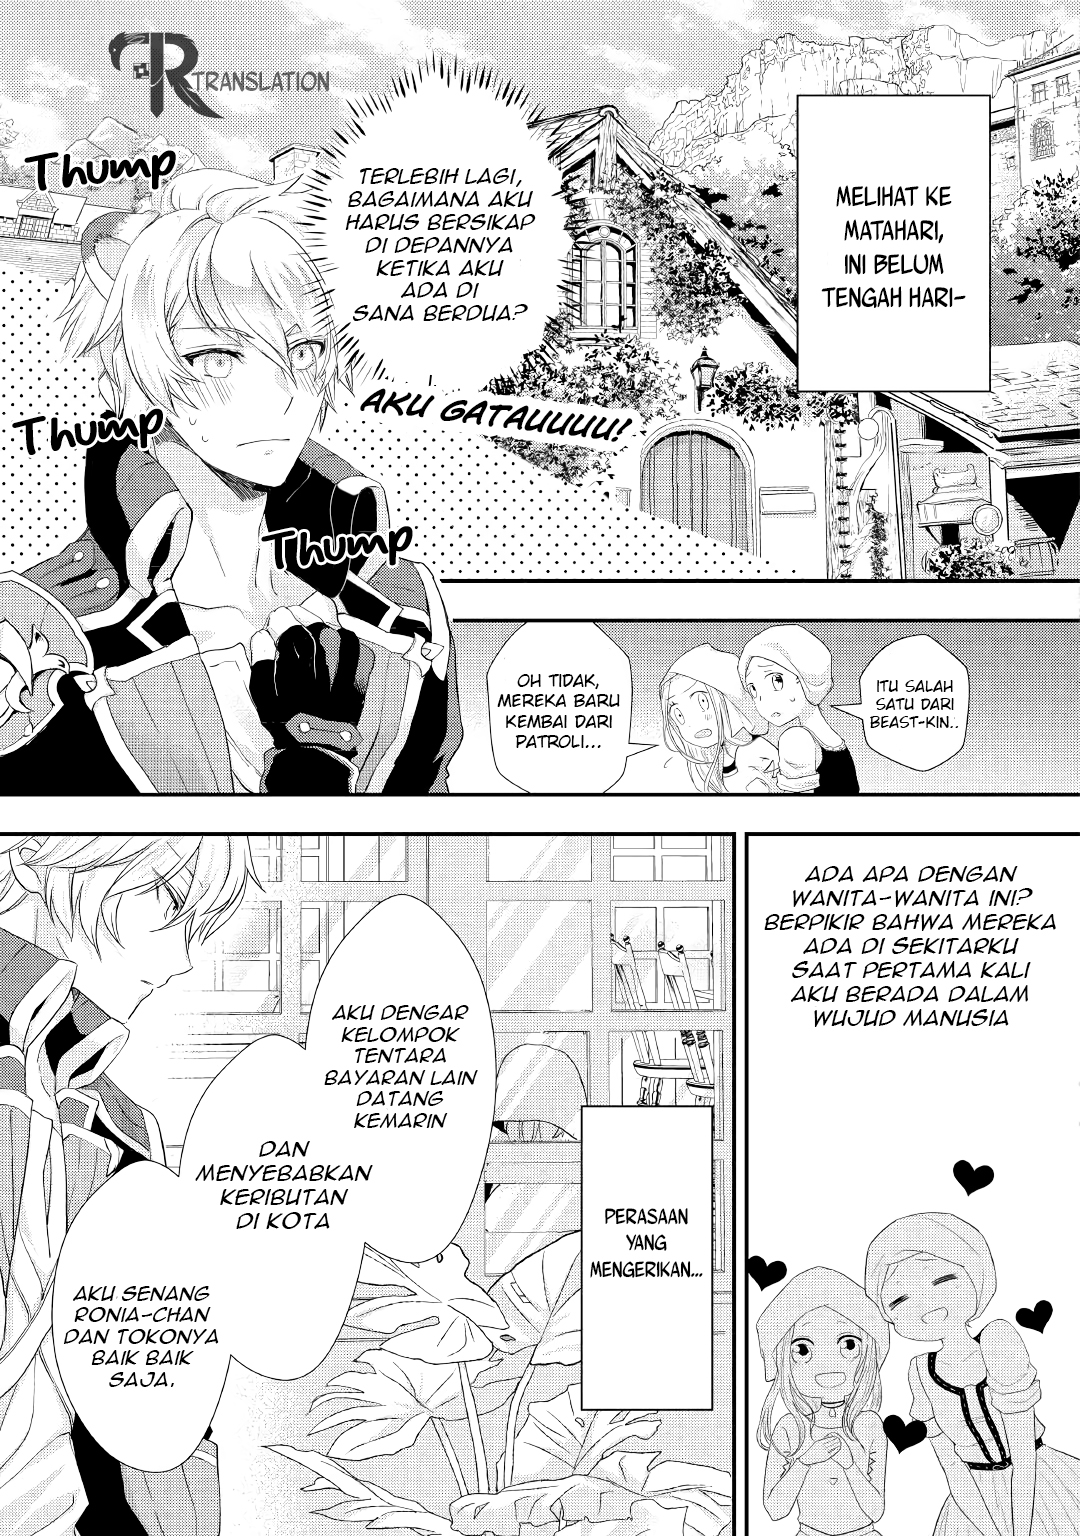 Milady Just Wants to Relax Chapter 13